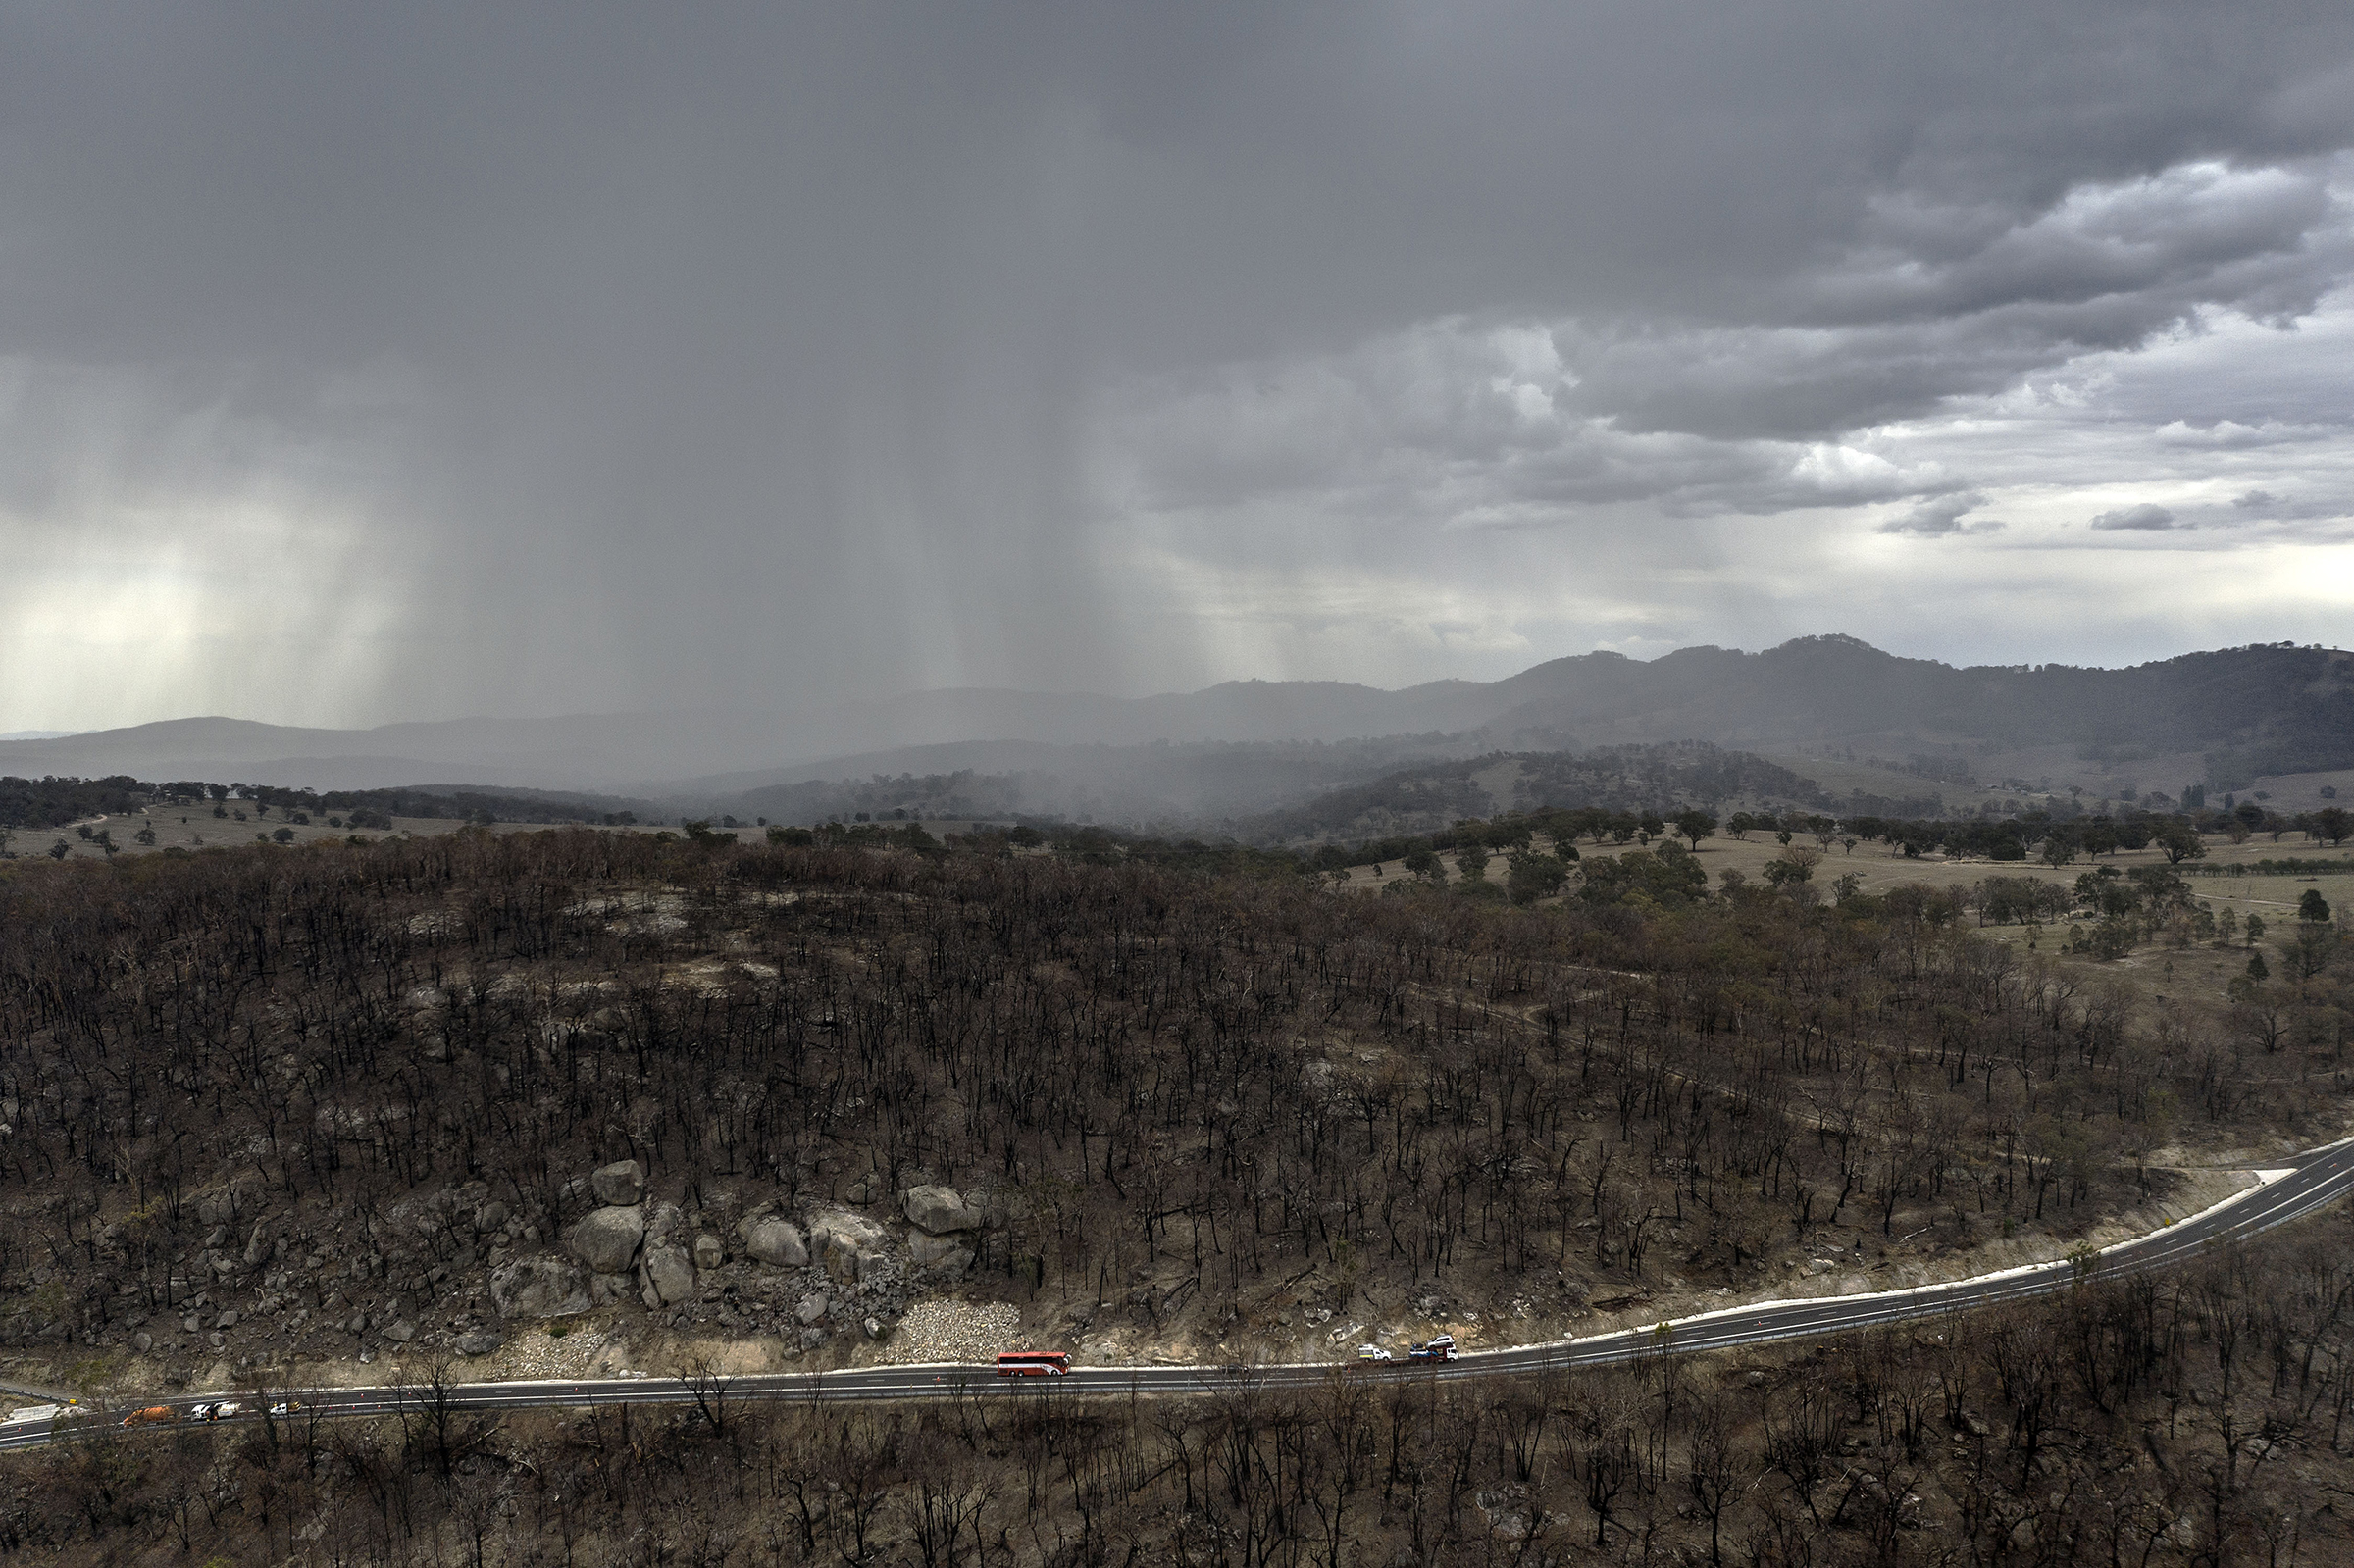 Rain begins to fall on drought and fire-ravaged country near Tamworth, Australia ahead of predicted further wet weather across NSW and Victoria this week, seen here on Jan. 15, 2020. (Brook Mitchell—Getty Images)